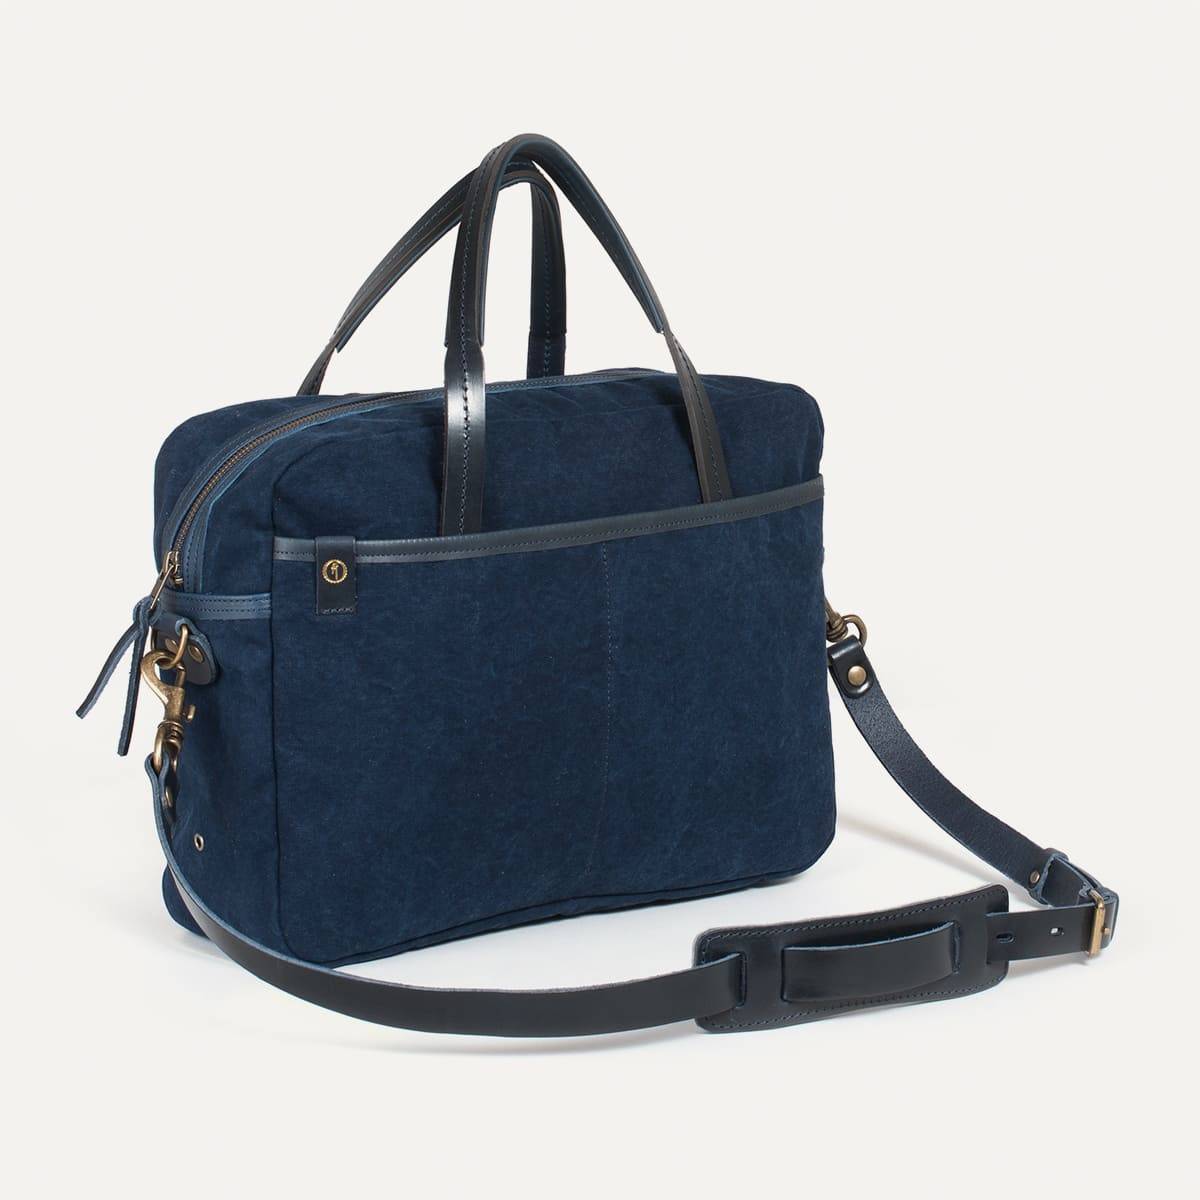 Business bag Report Canvas and Leather - Indigo (image n°4)